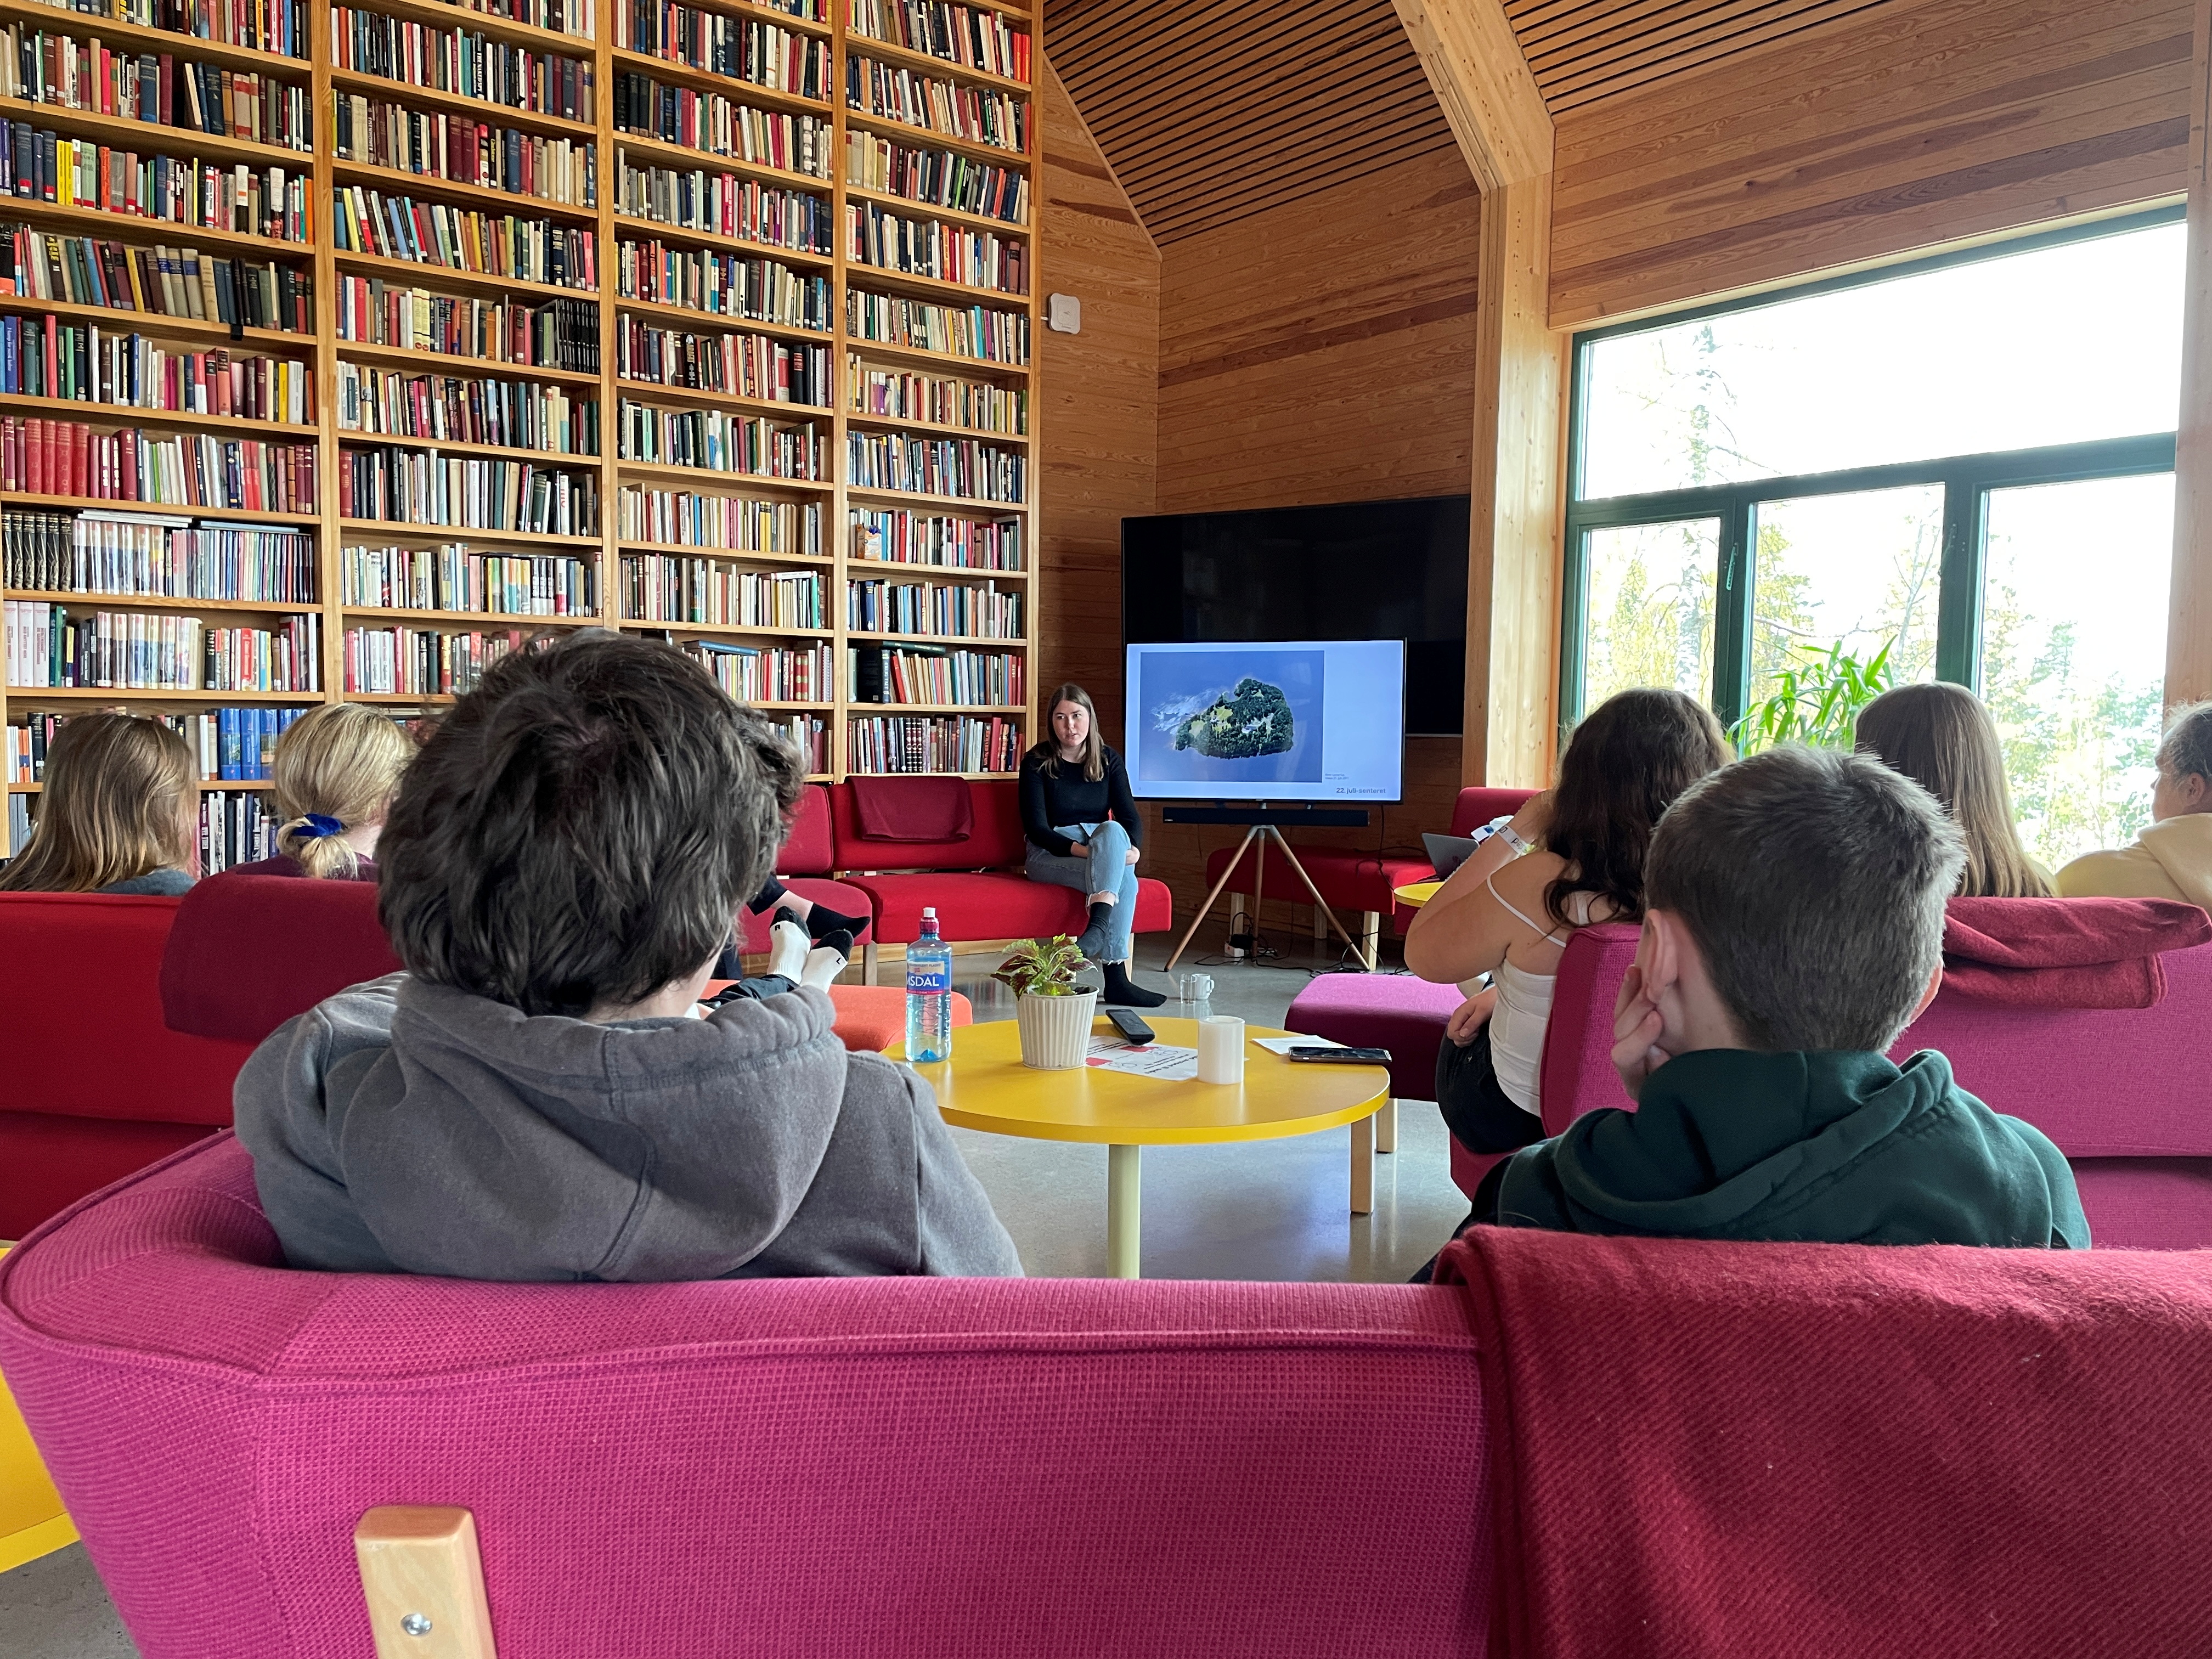 Astrid Hoem, a survivor of the 2011 shooting on Utoeya, speaks with teenagers about her experiences of that day, in a library at Utoeya island, Norway May 11, 2021. REUTERS/Gwladys Fouche